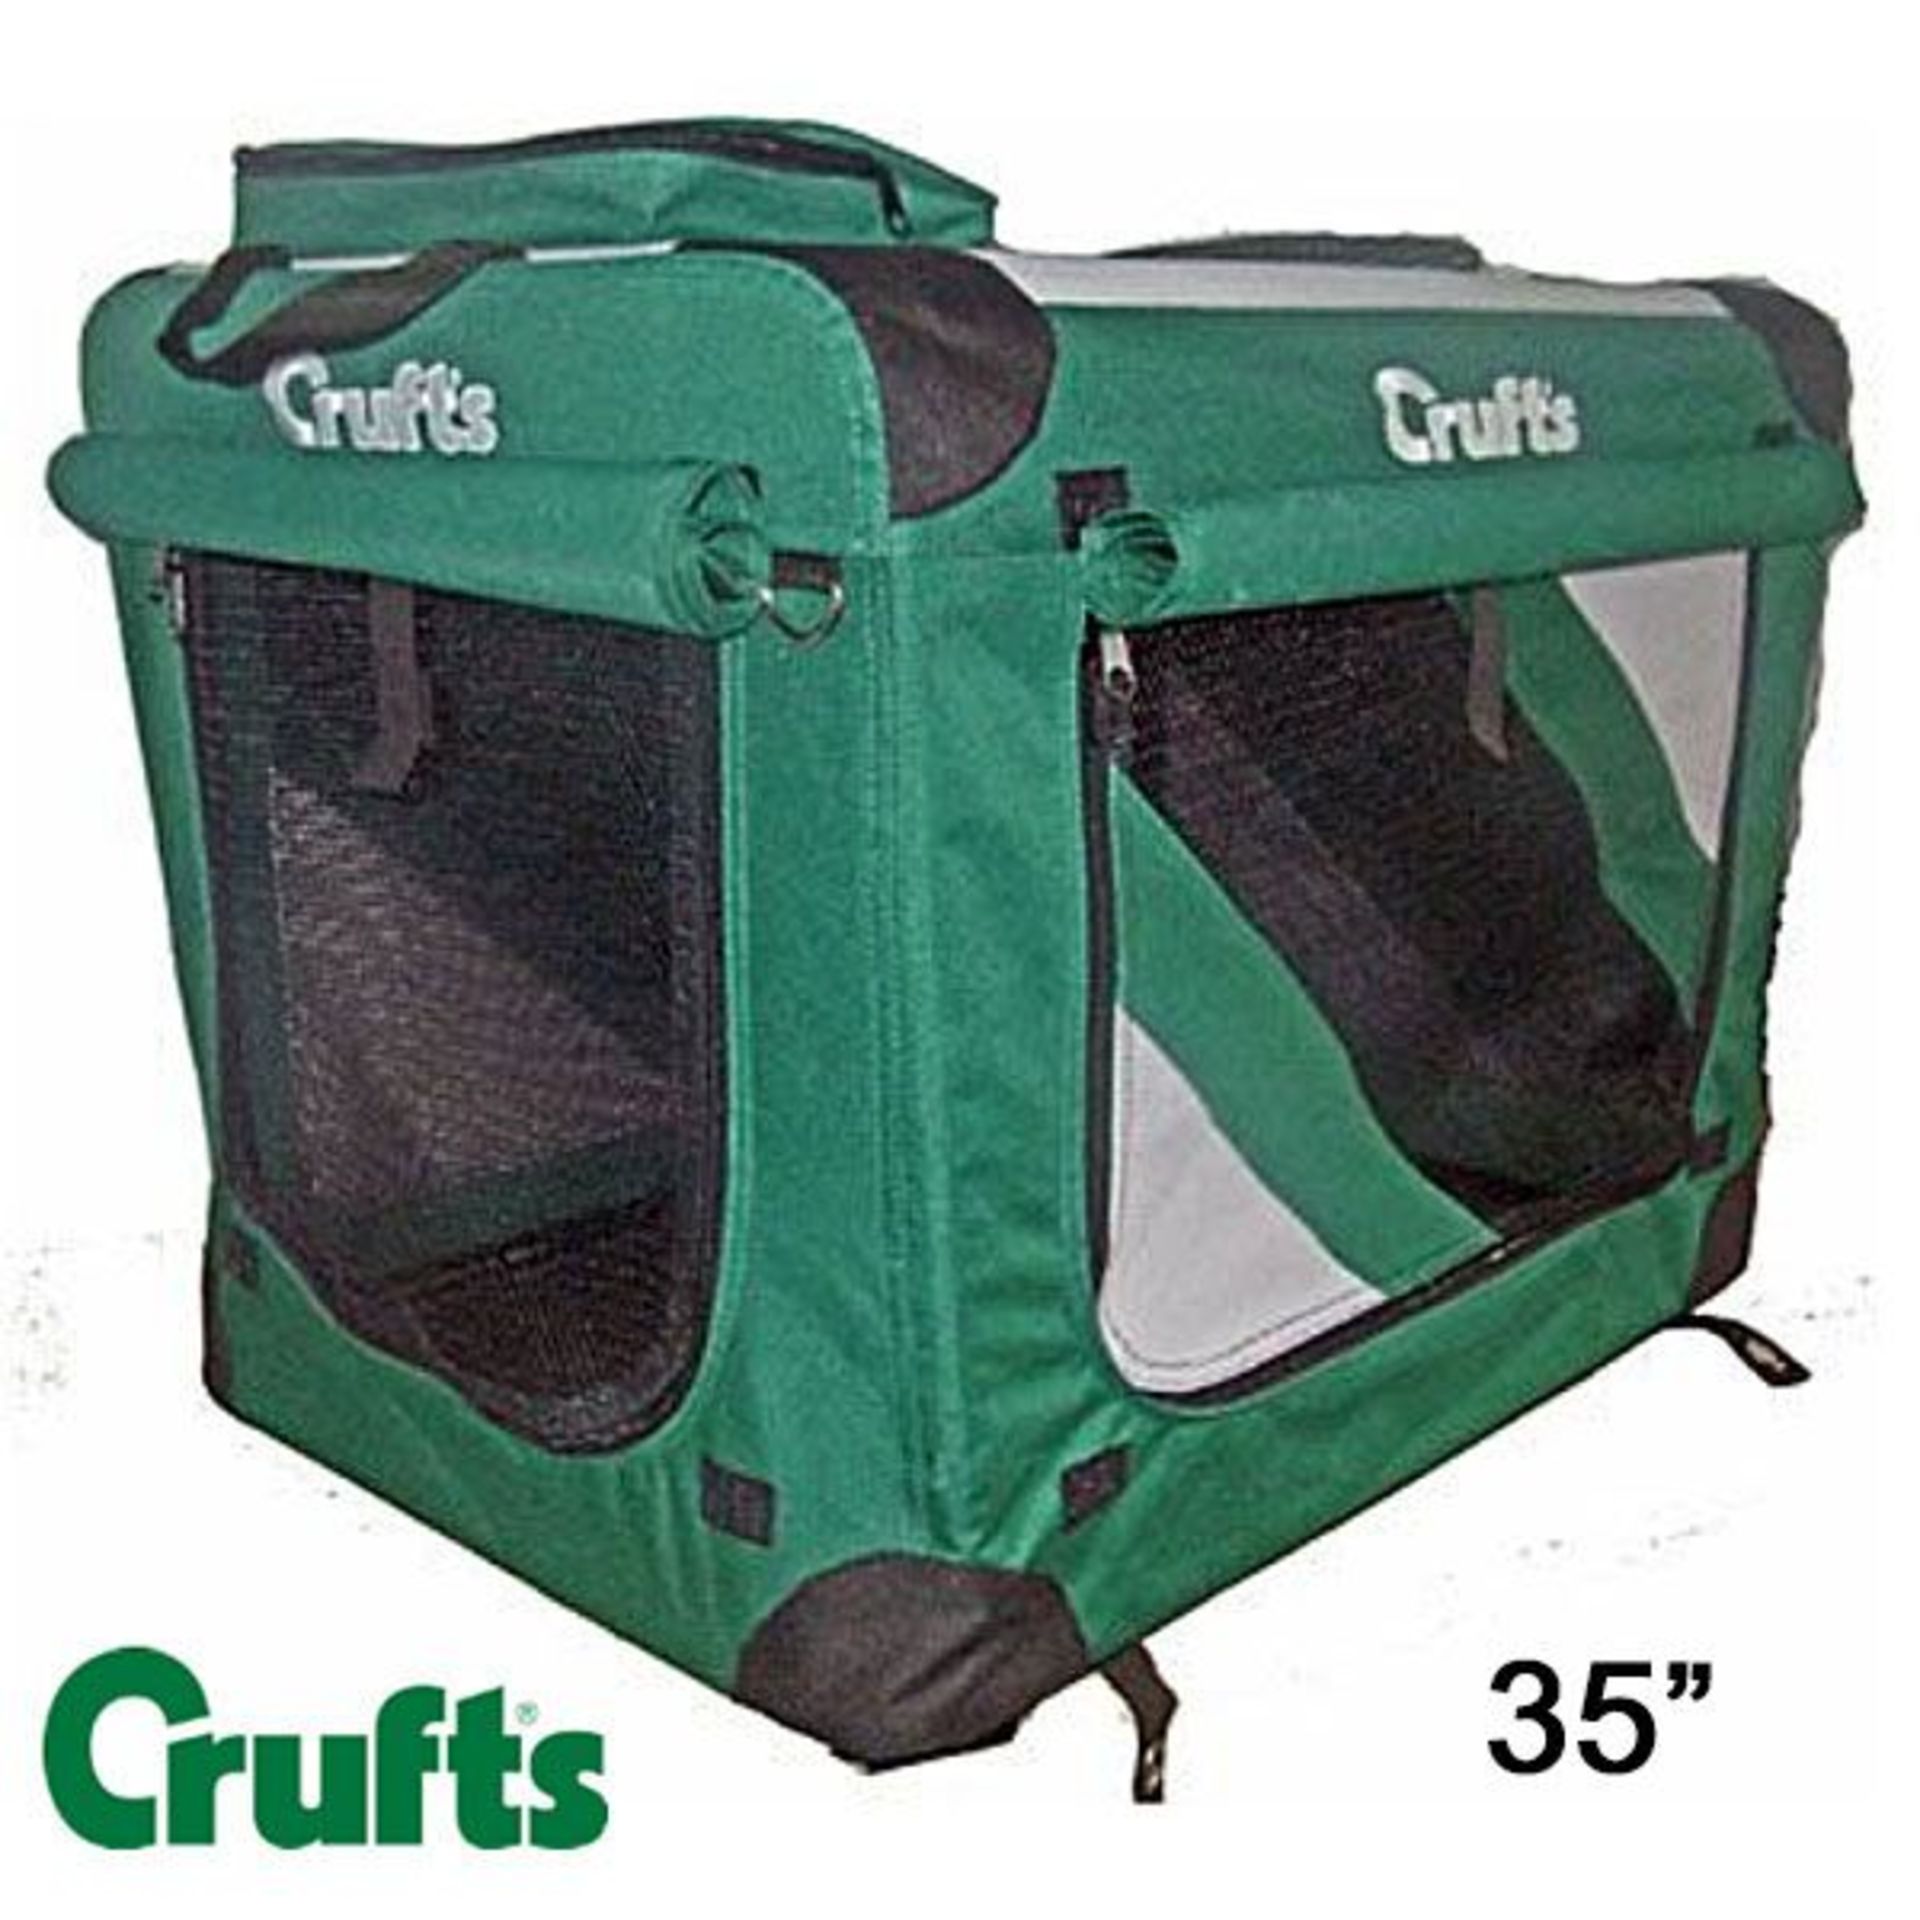 44 x 35" Crufts Soft Crate. Green/Grey. Total RRP £4,048